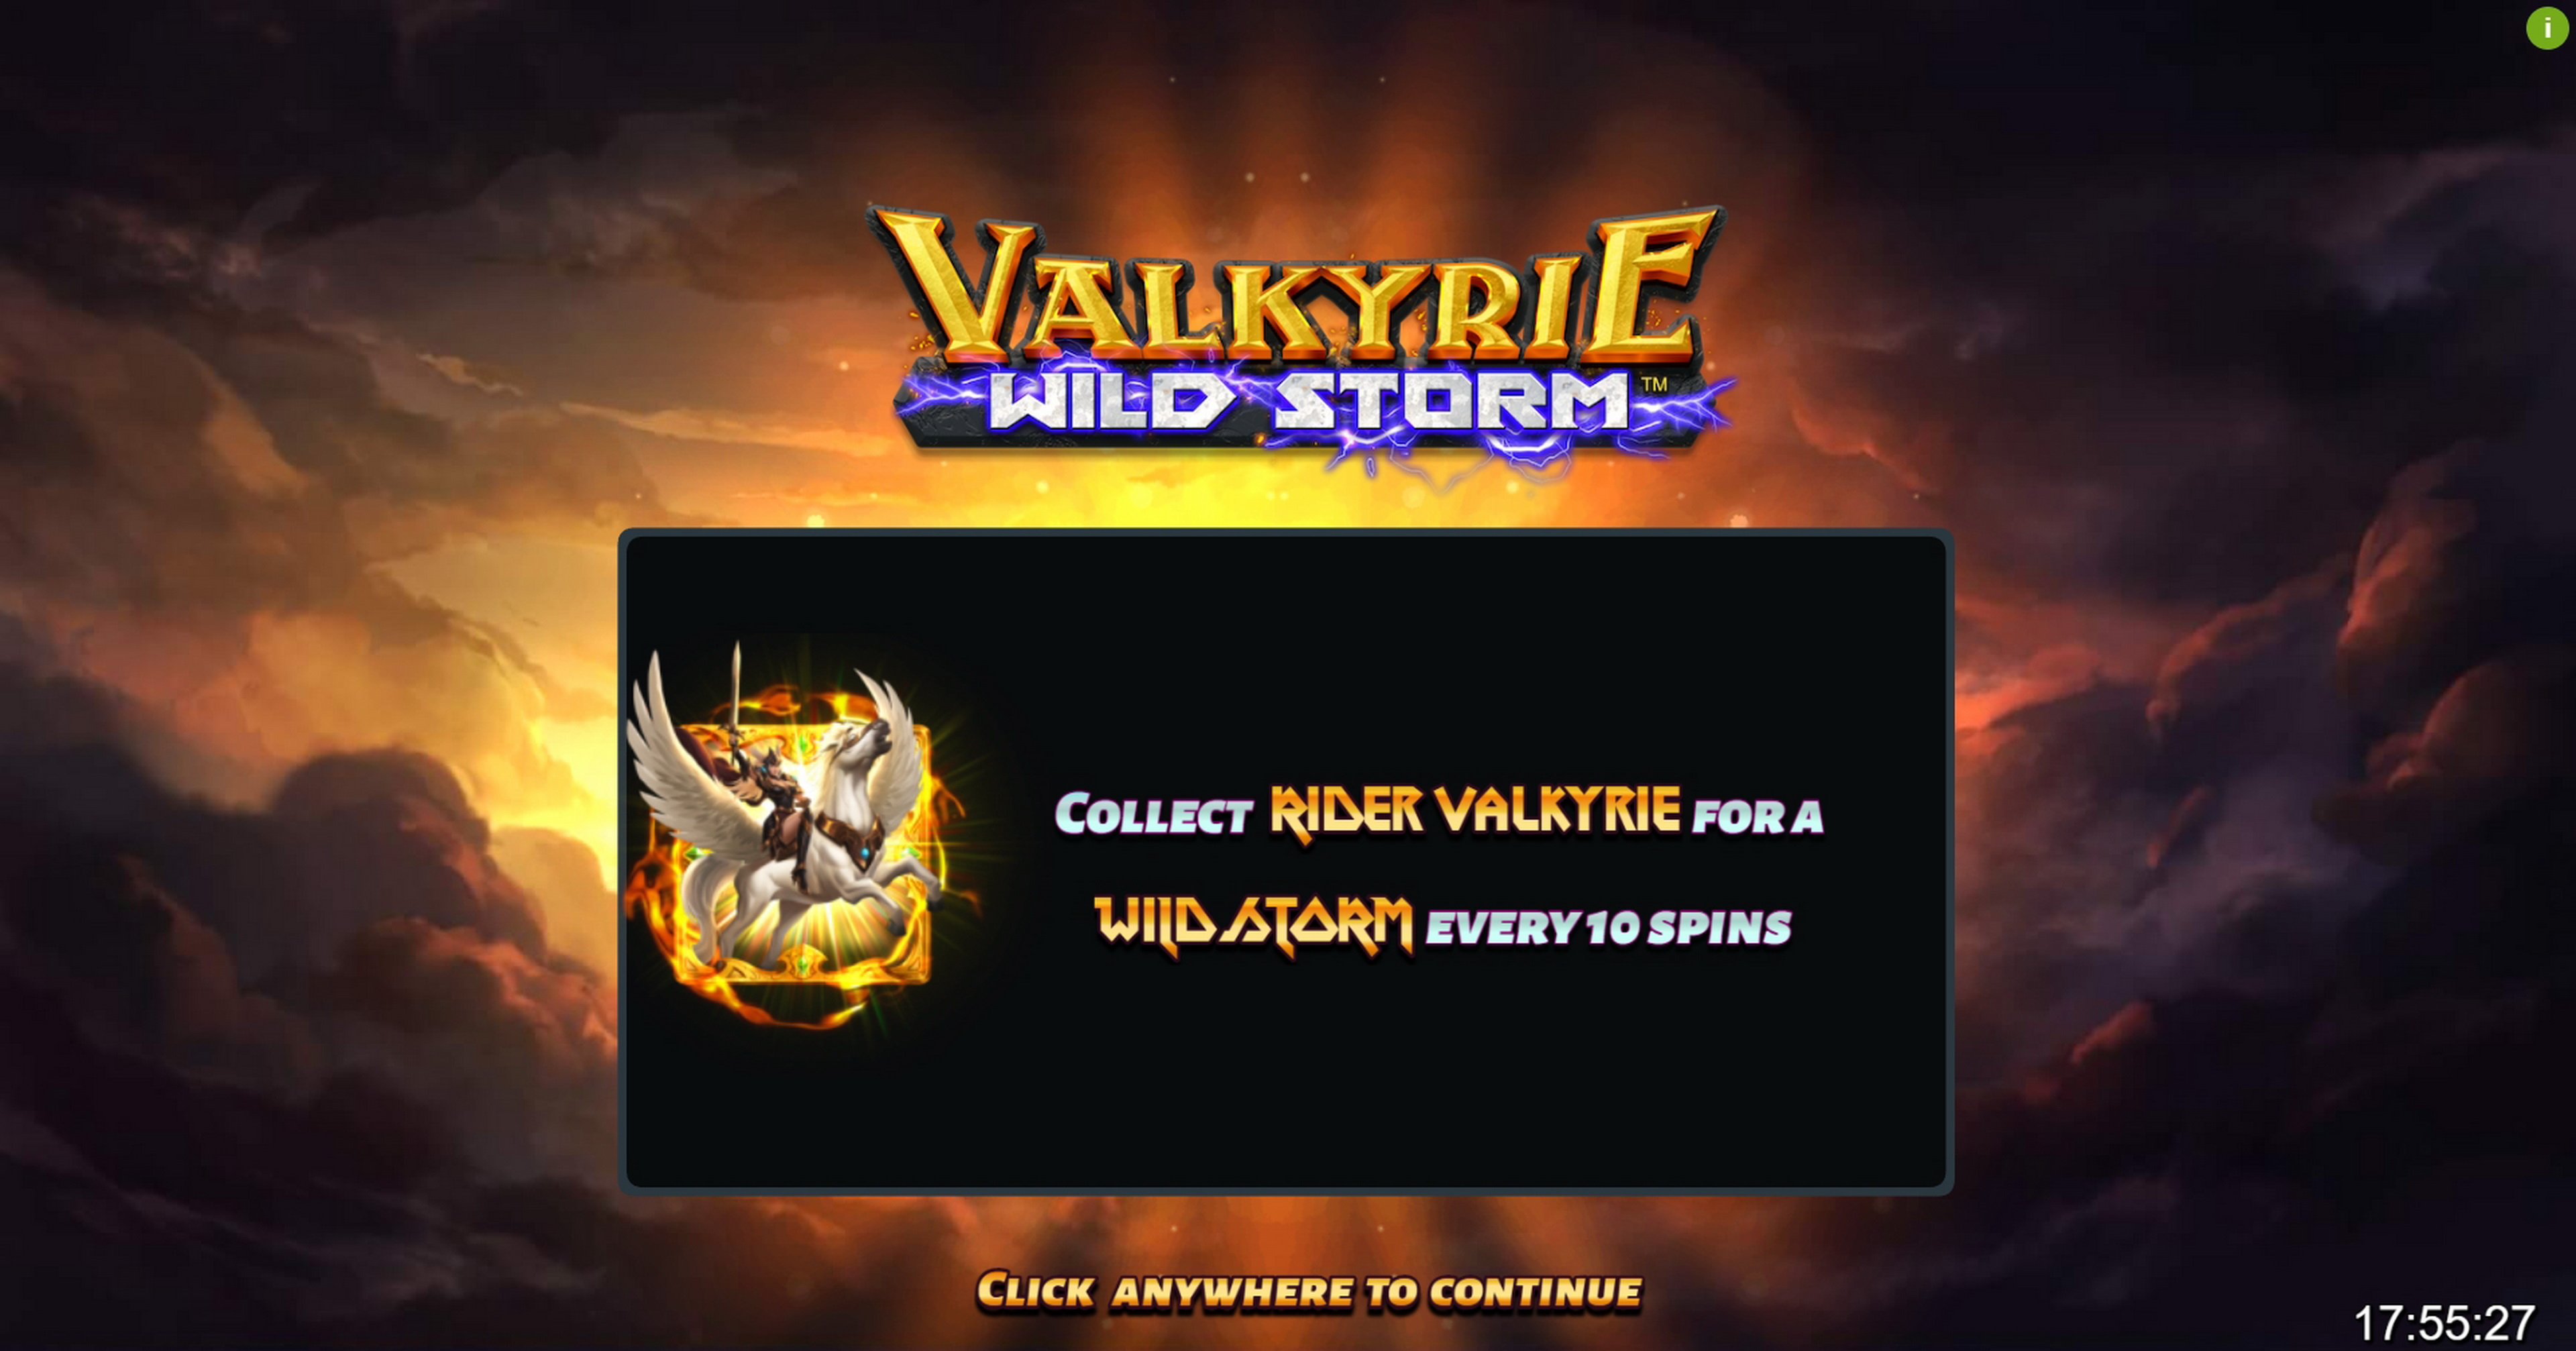 Play Valkyrie Wild Storm Free Casino Slot Game by Boomerang Studios